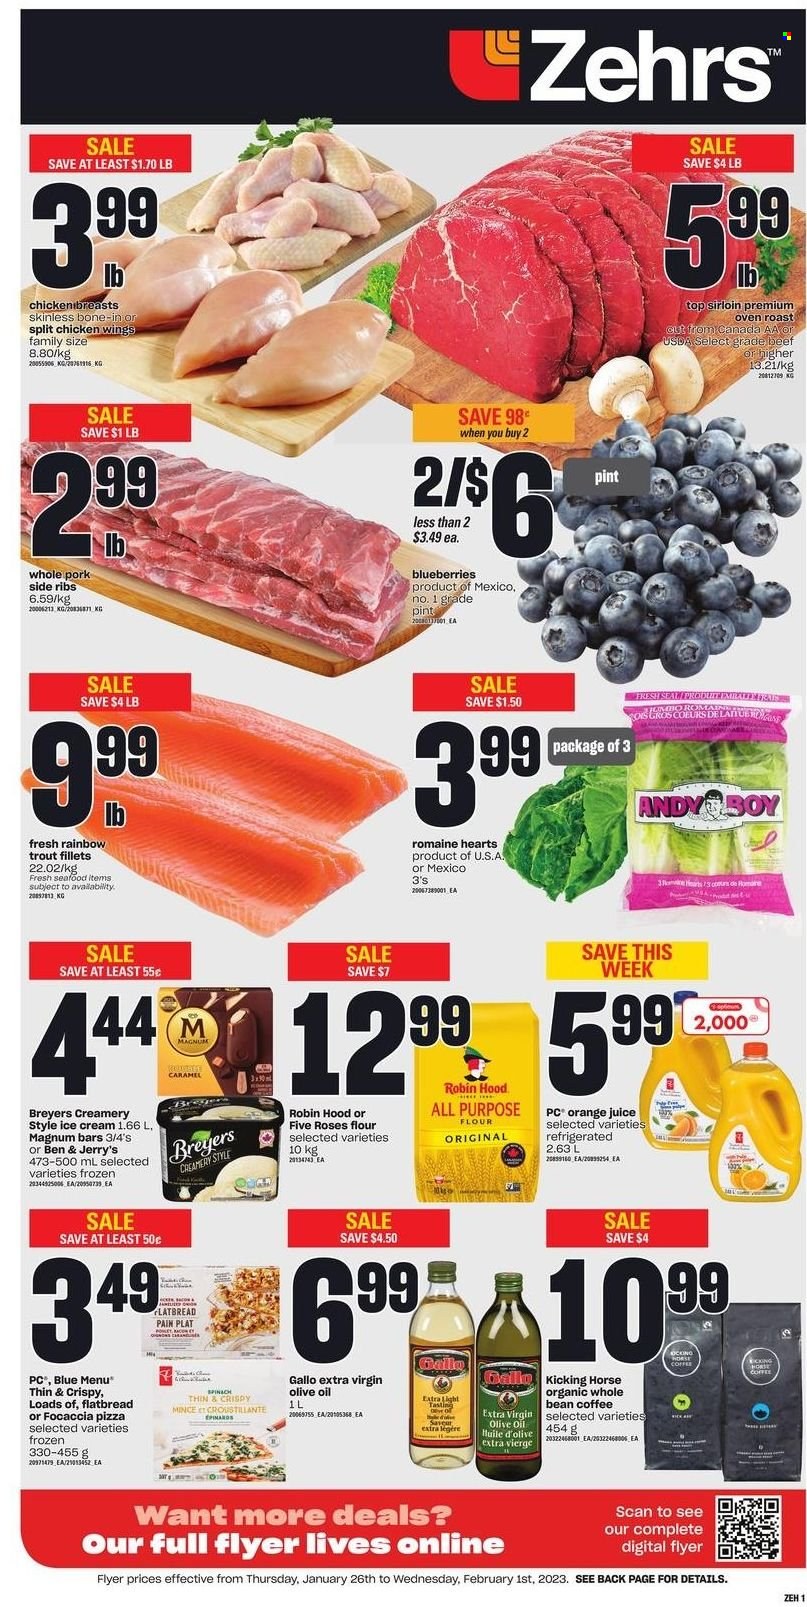 thumbnail - Zehrs Flyer - January 26, 2023 - February 01, 2023 - Sales products - focaccia, flatbread, blueberries, trout, seafood, pizza, Magnum, ice cream, Ben & Jerry's, chicken wings, flour, extra virgin olive oil, olive oil, oil, orange juice, juice, coffee, chicken breasts, ribs, Optimum. Page 1.